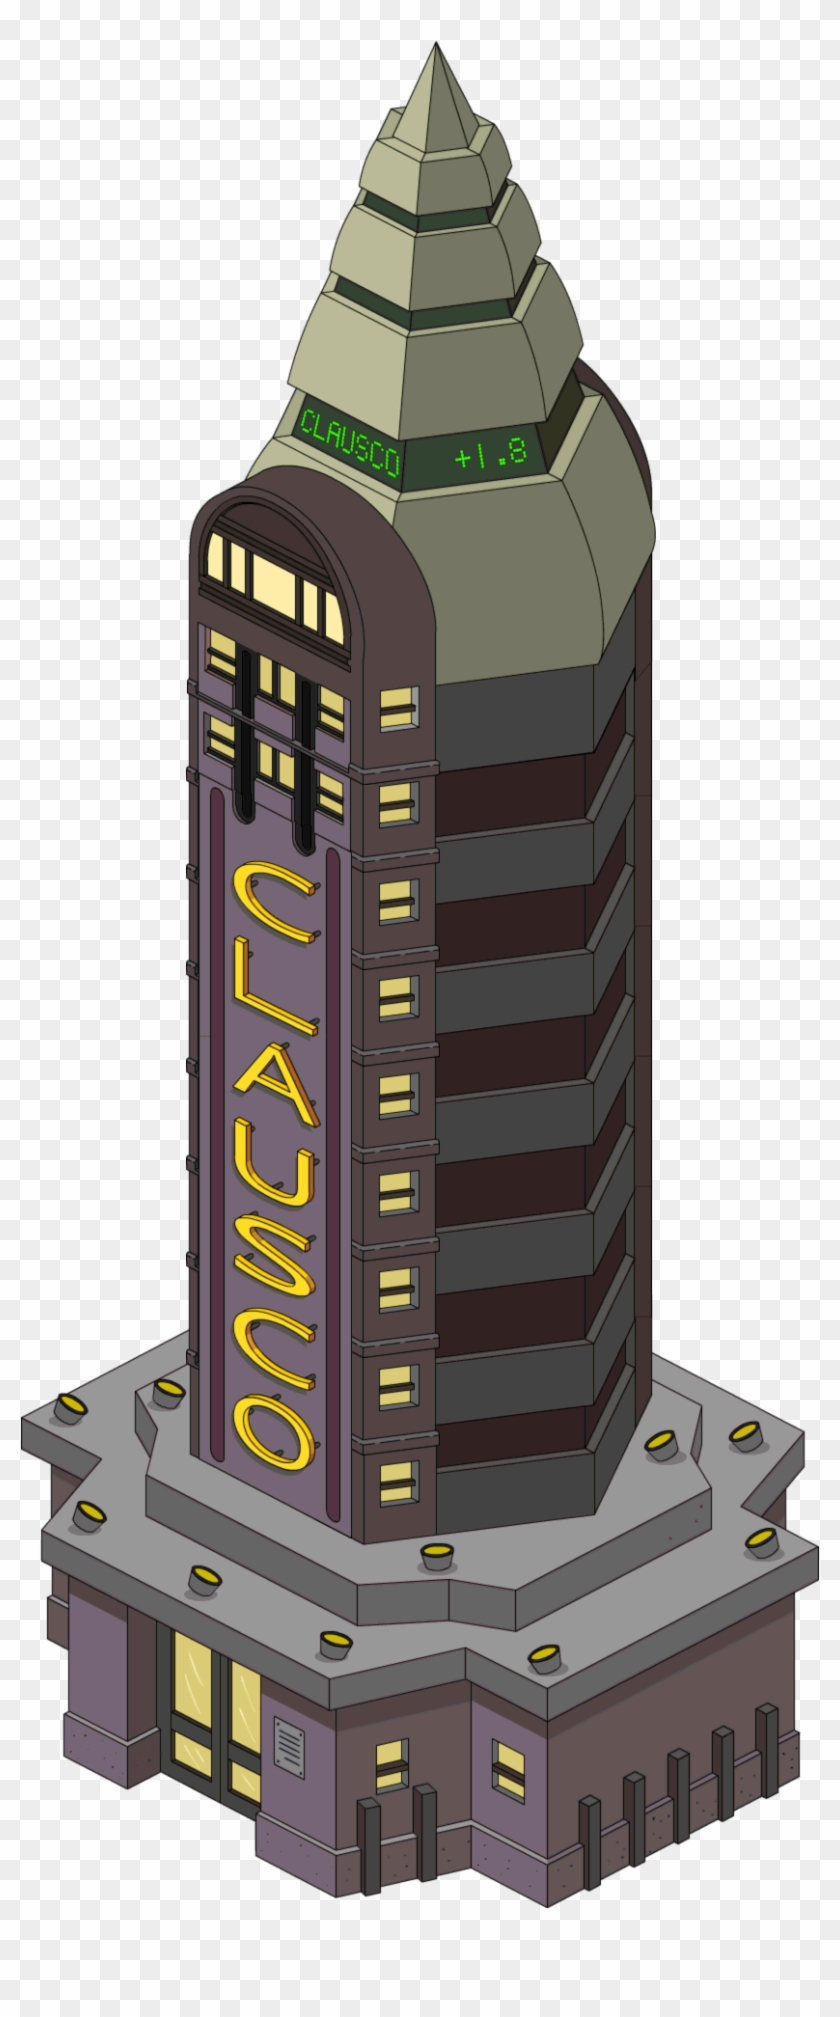 Tapped Out Clausco - Tower Block Clipart #3312931